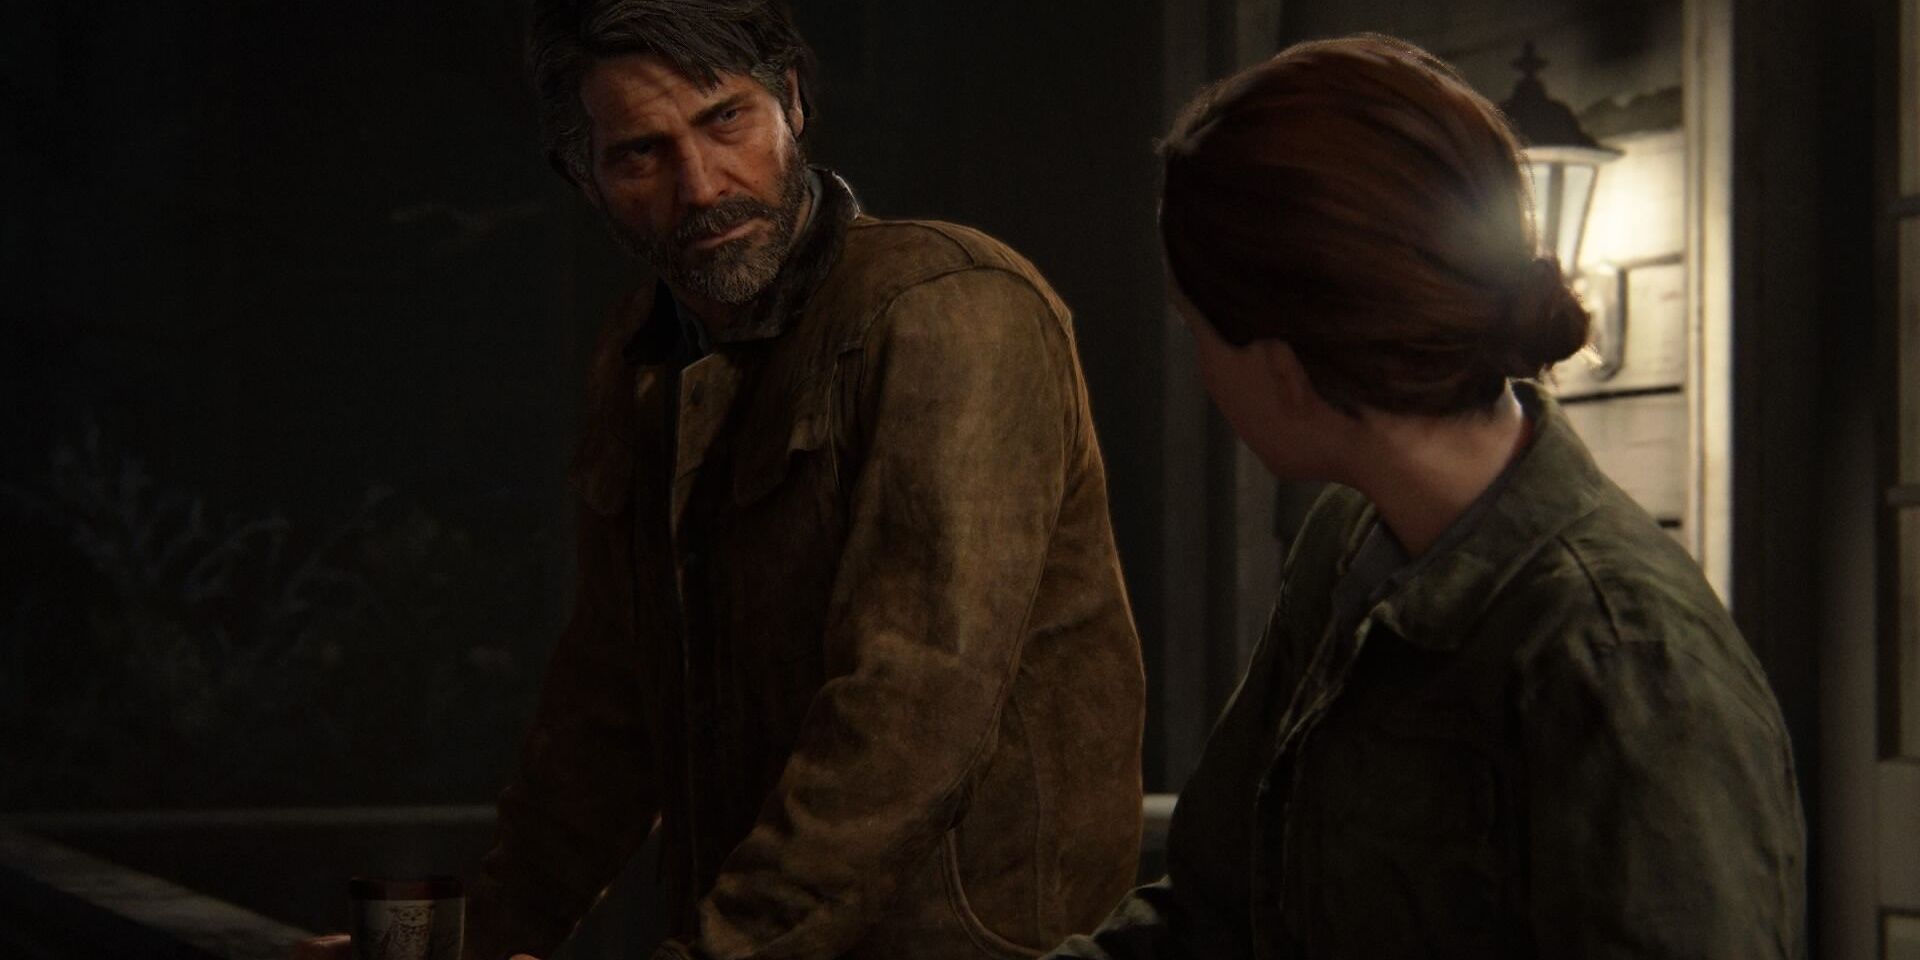 Joel argues with Ellie in The Last of Us Part II Cropped